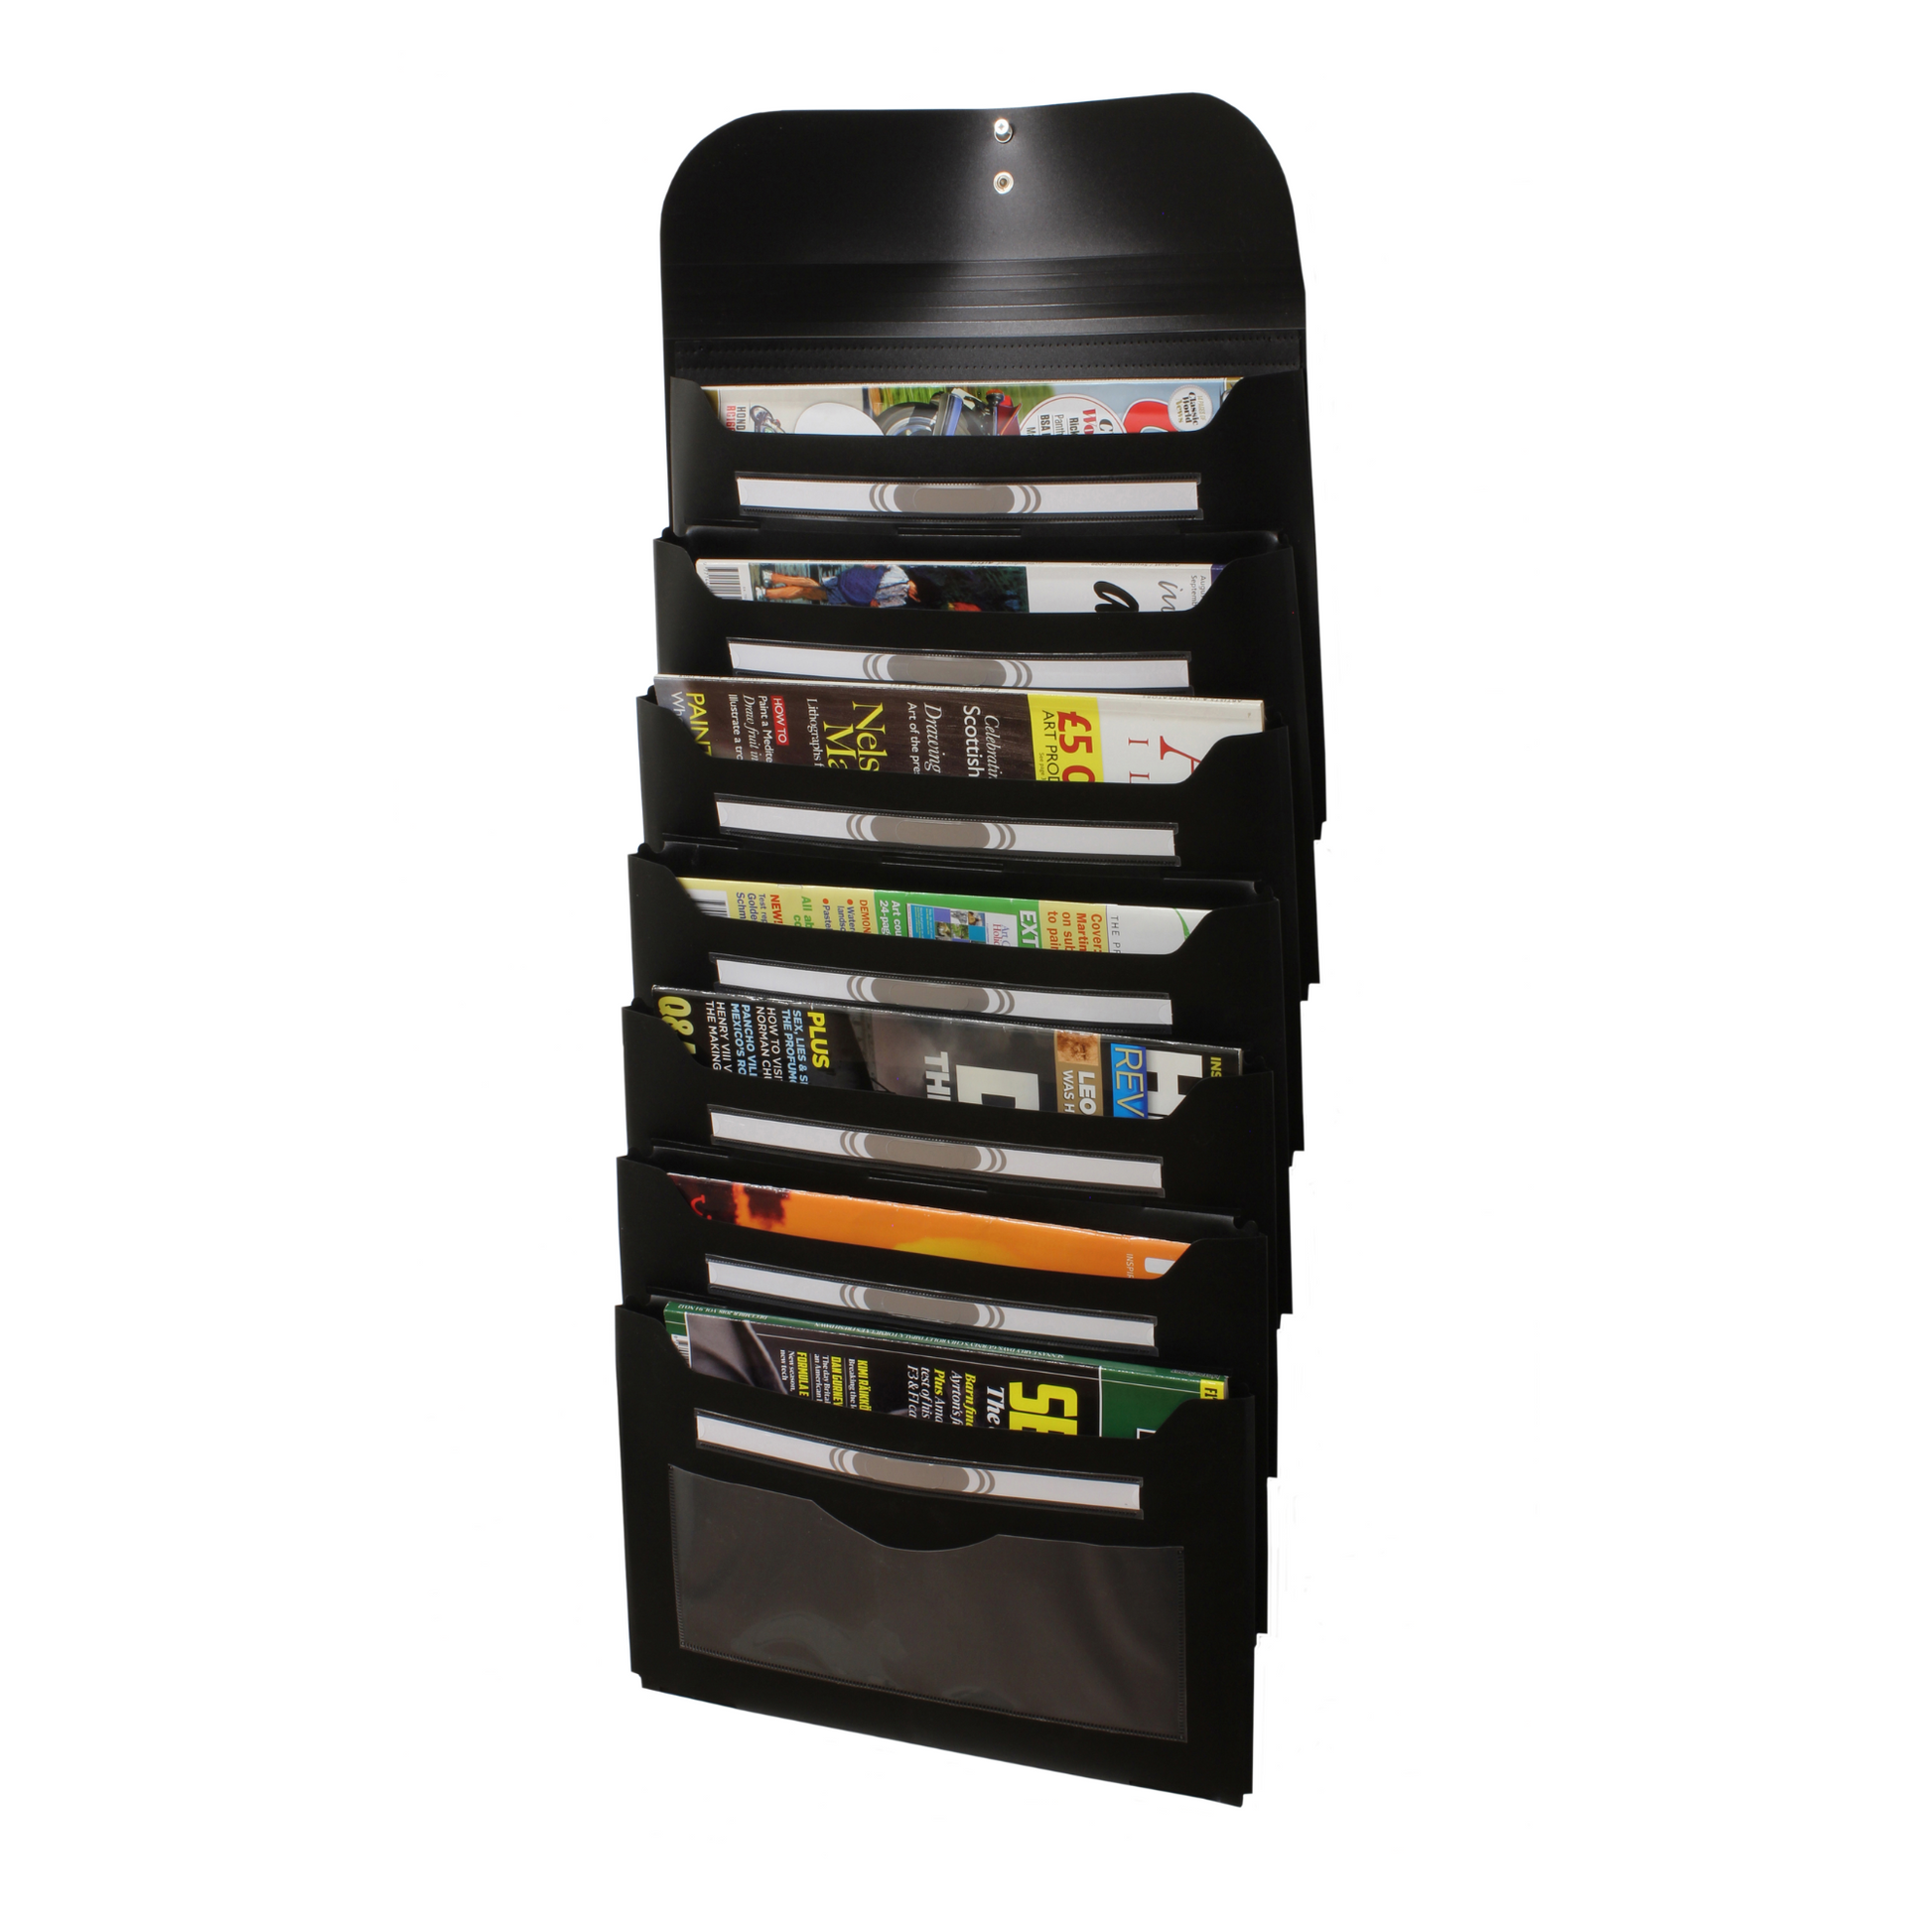 Vertical black wall-mounted Wallfile organizer filled with assorted magazines and papers in each slot, demonstrating its storage capacity and functionality.